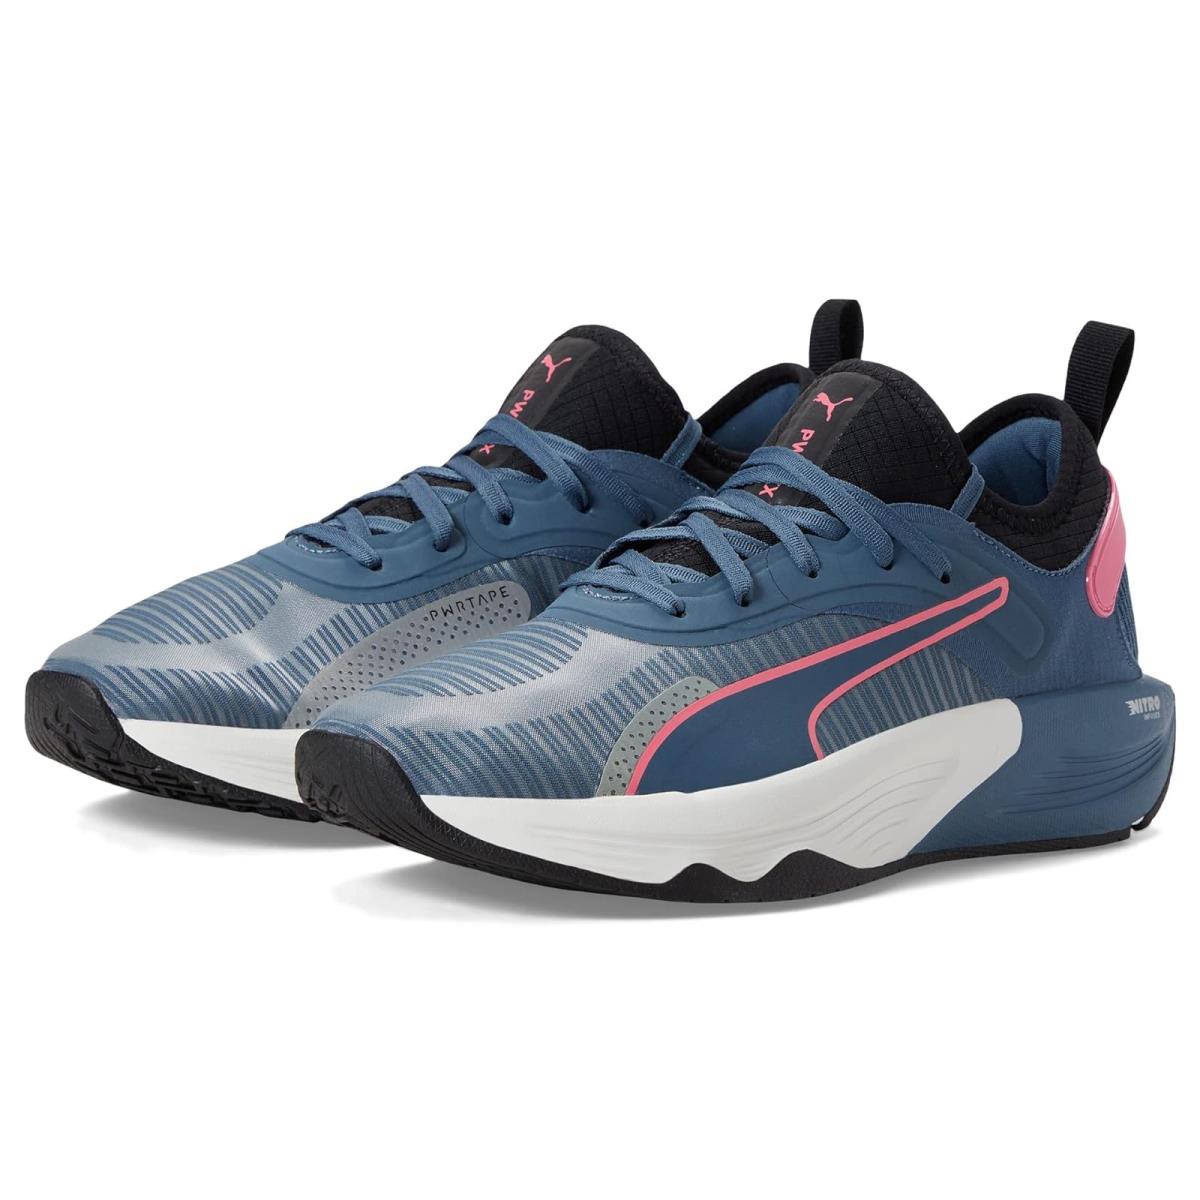 Woman`s Sneakers Athletic Shoes Puma Pwr XX Nitro Evening Sky/Puma Black/Sunset Pink